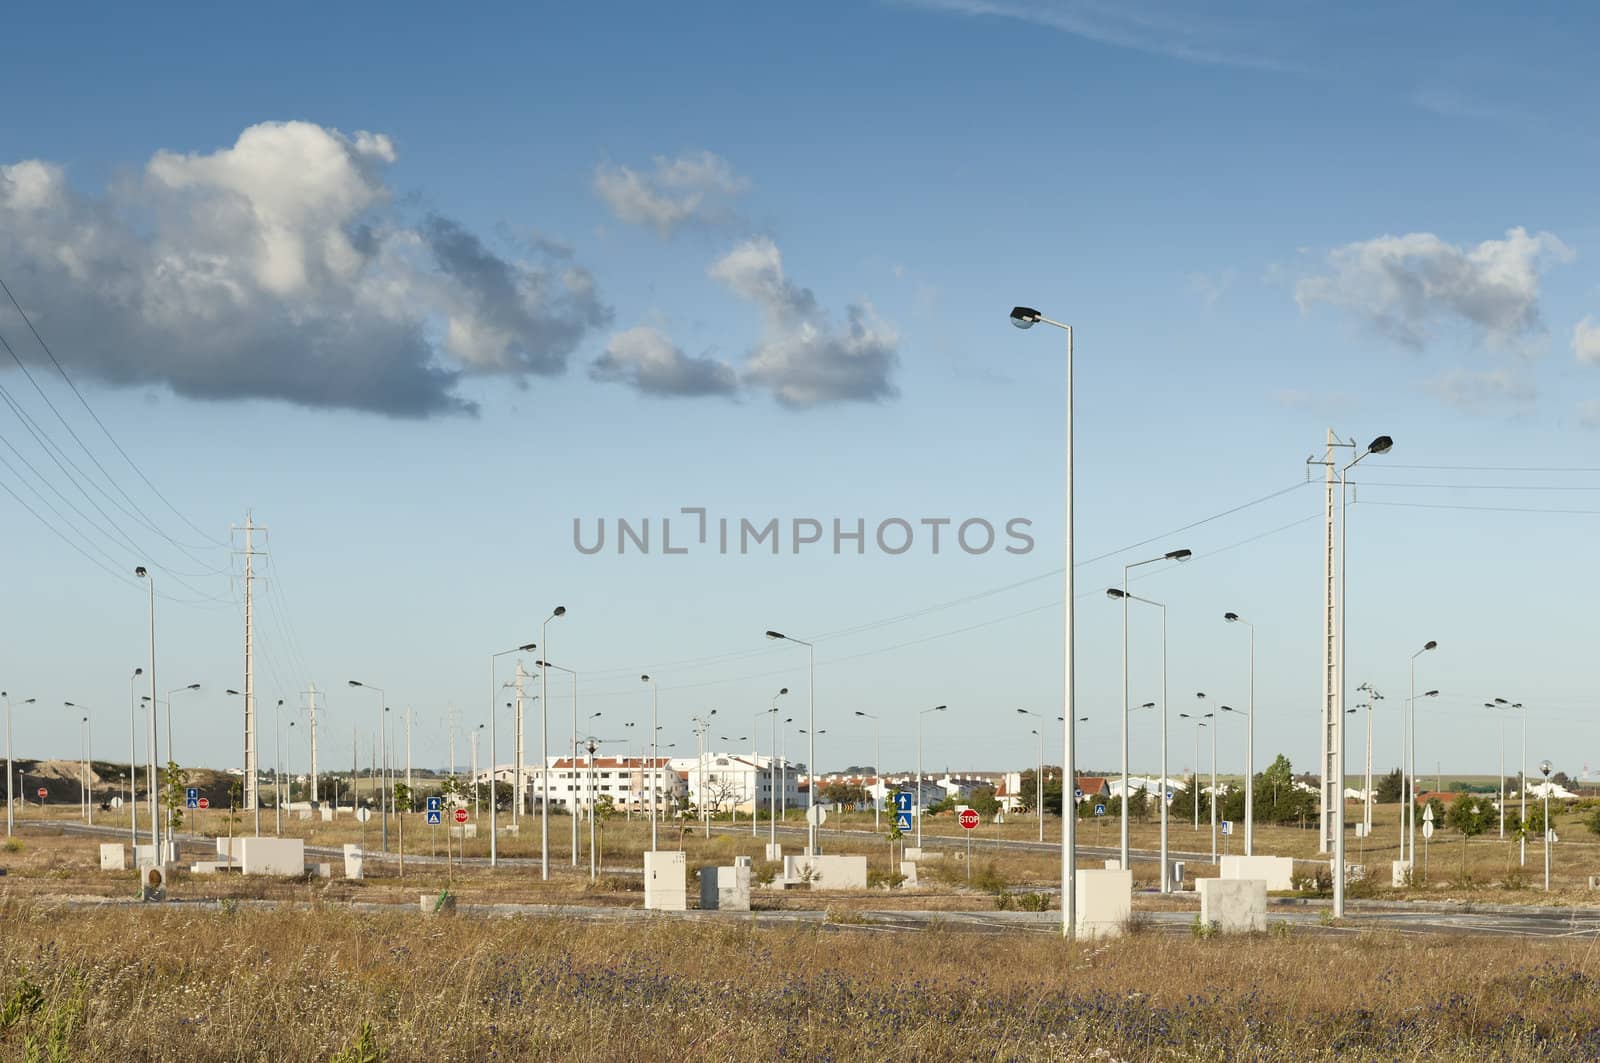 Fully infra-structured vacant lots ready for construction in the industrial park of Evora, Portugal